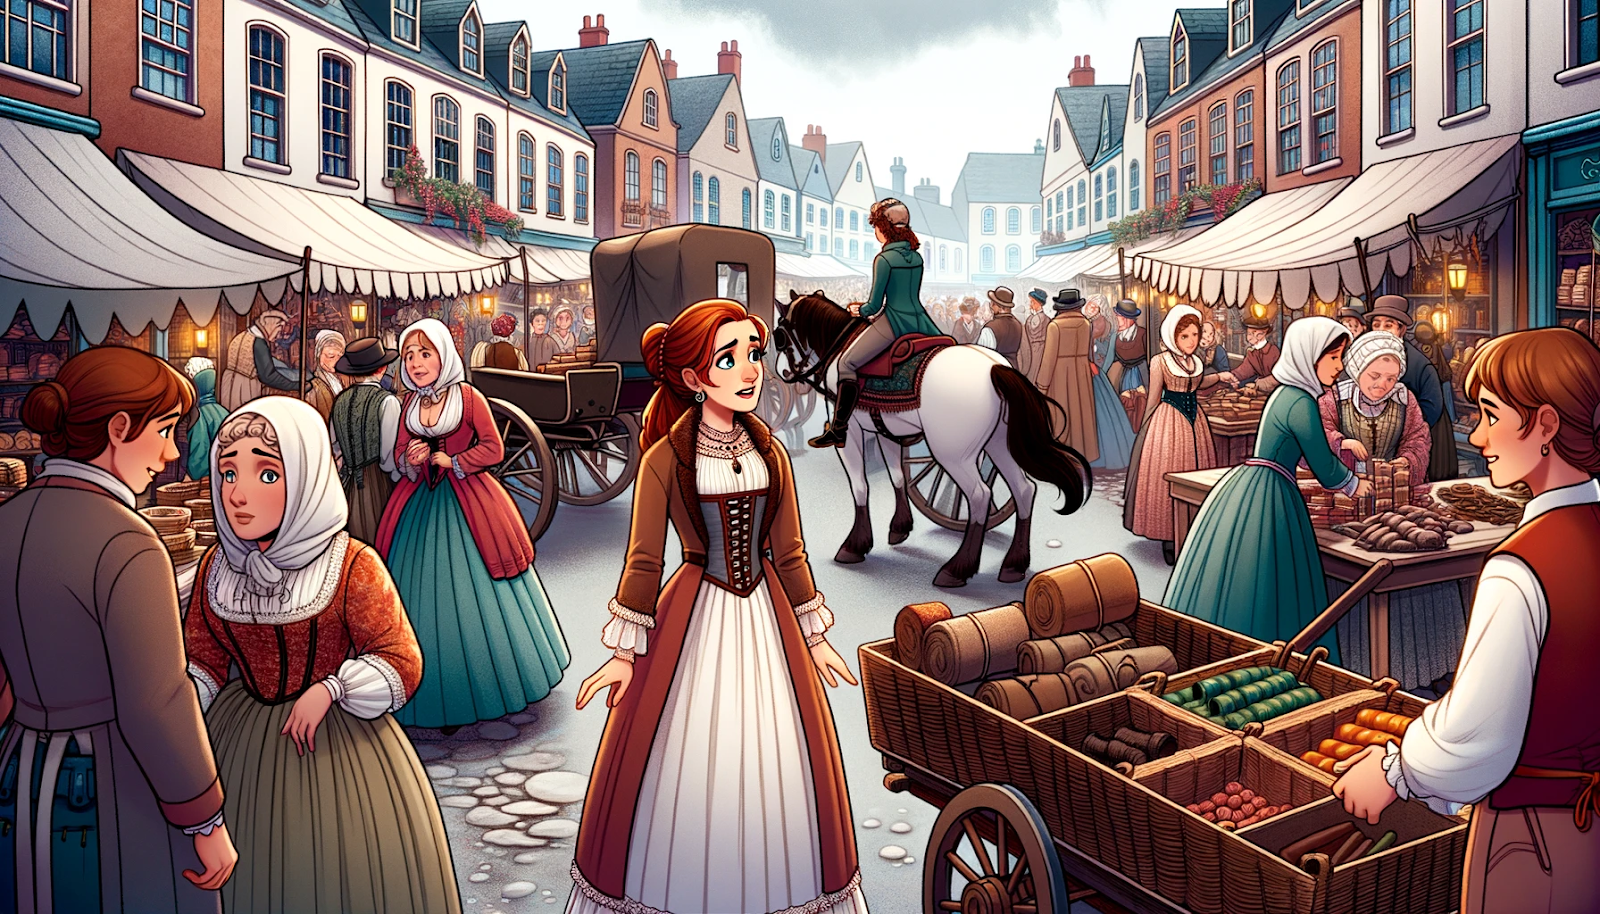 Illustration of Jenna standing in a bustling historical marketplace. Horse-drawn carts, stalls selling various goods, and people dressed in period attire fill the scene. Women wear corsets, and men don waistcoats. In the crowd, Jenna spots her great-great-grandmother, Anna, who is engaged in a lively barter with a merchant. Jenna looks both amazed and confused by her surroundings.